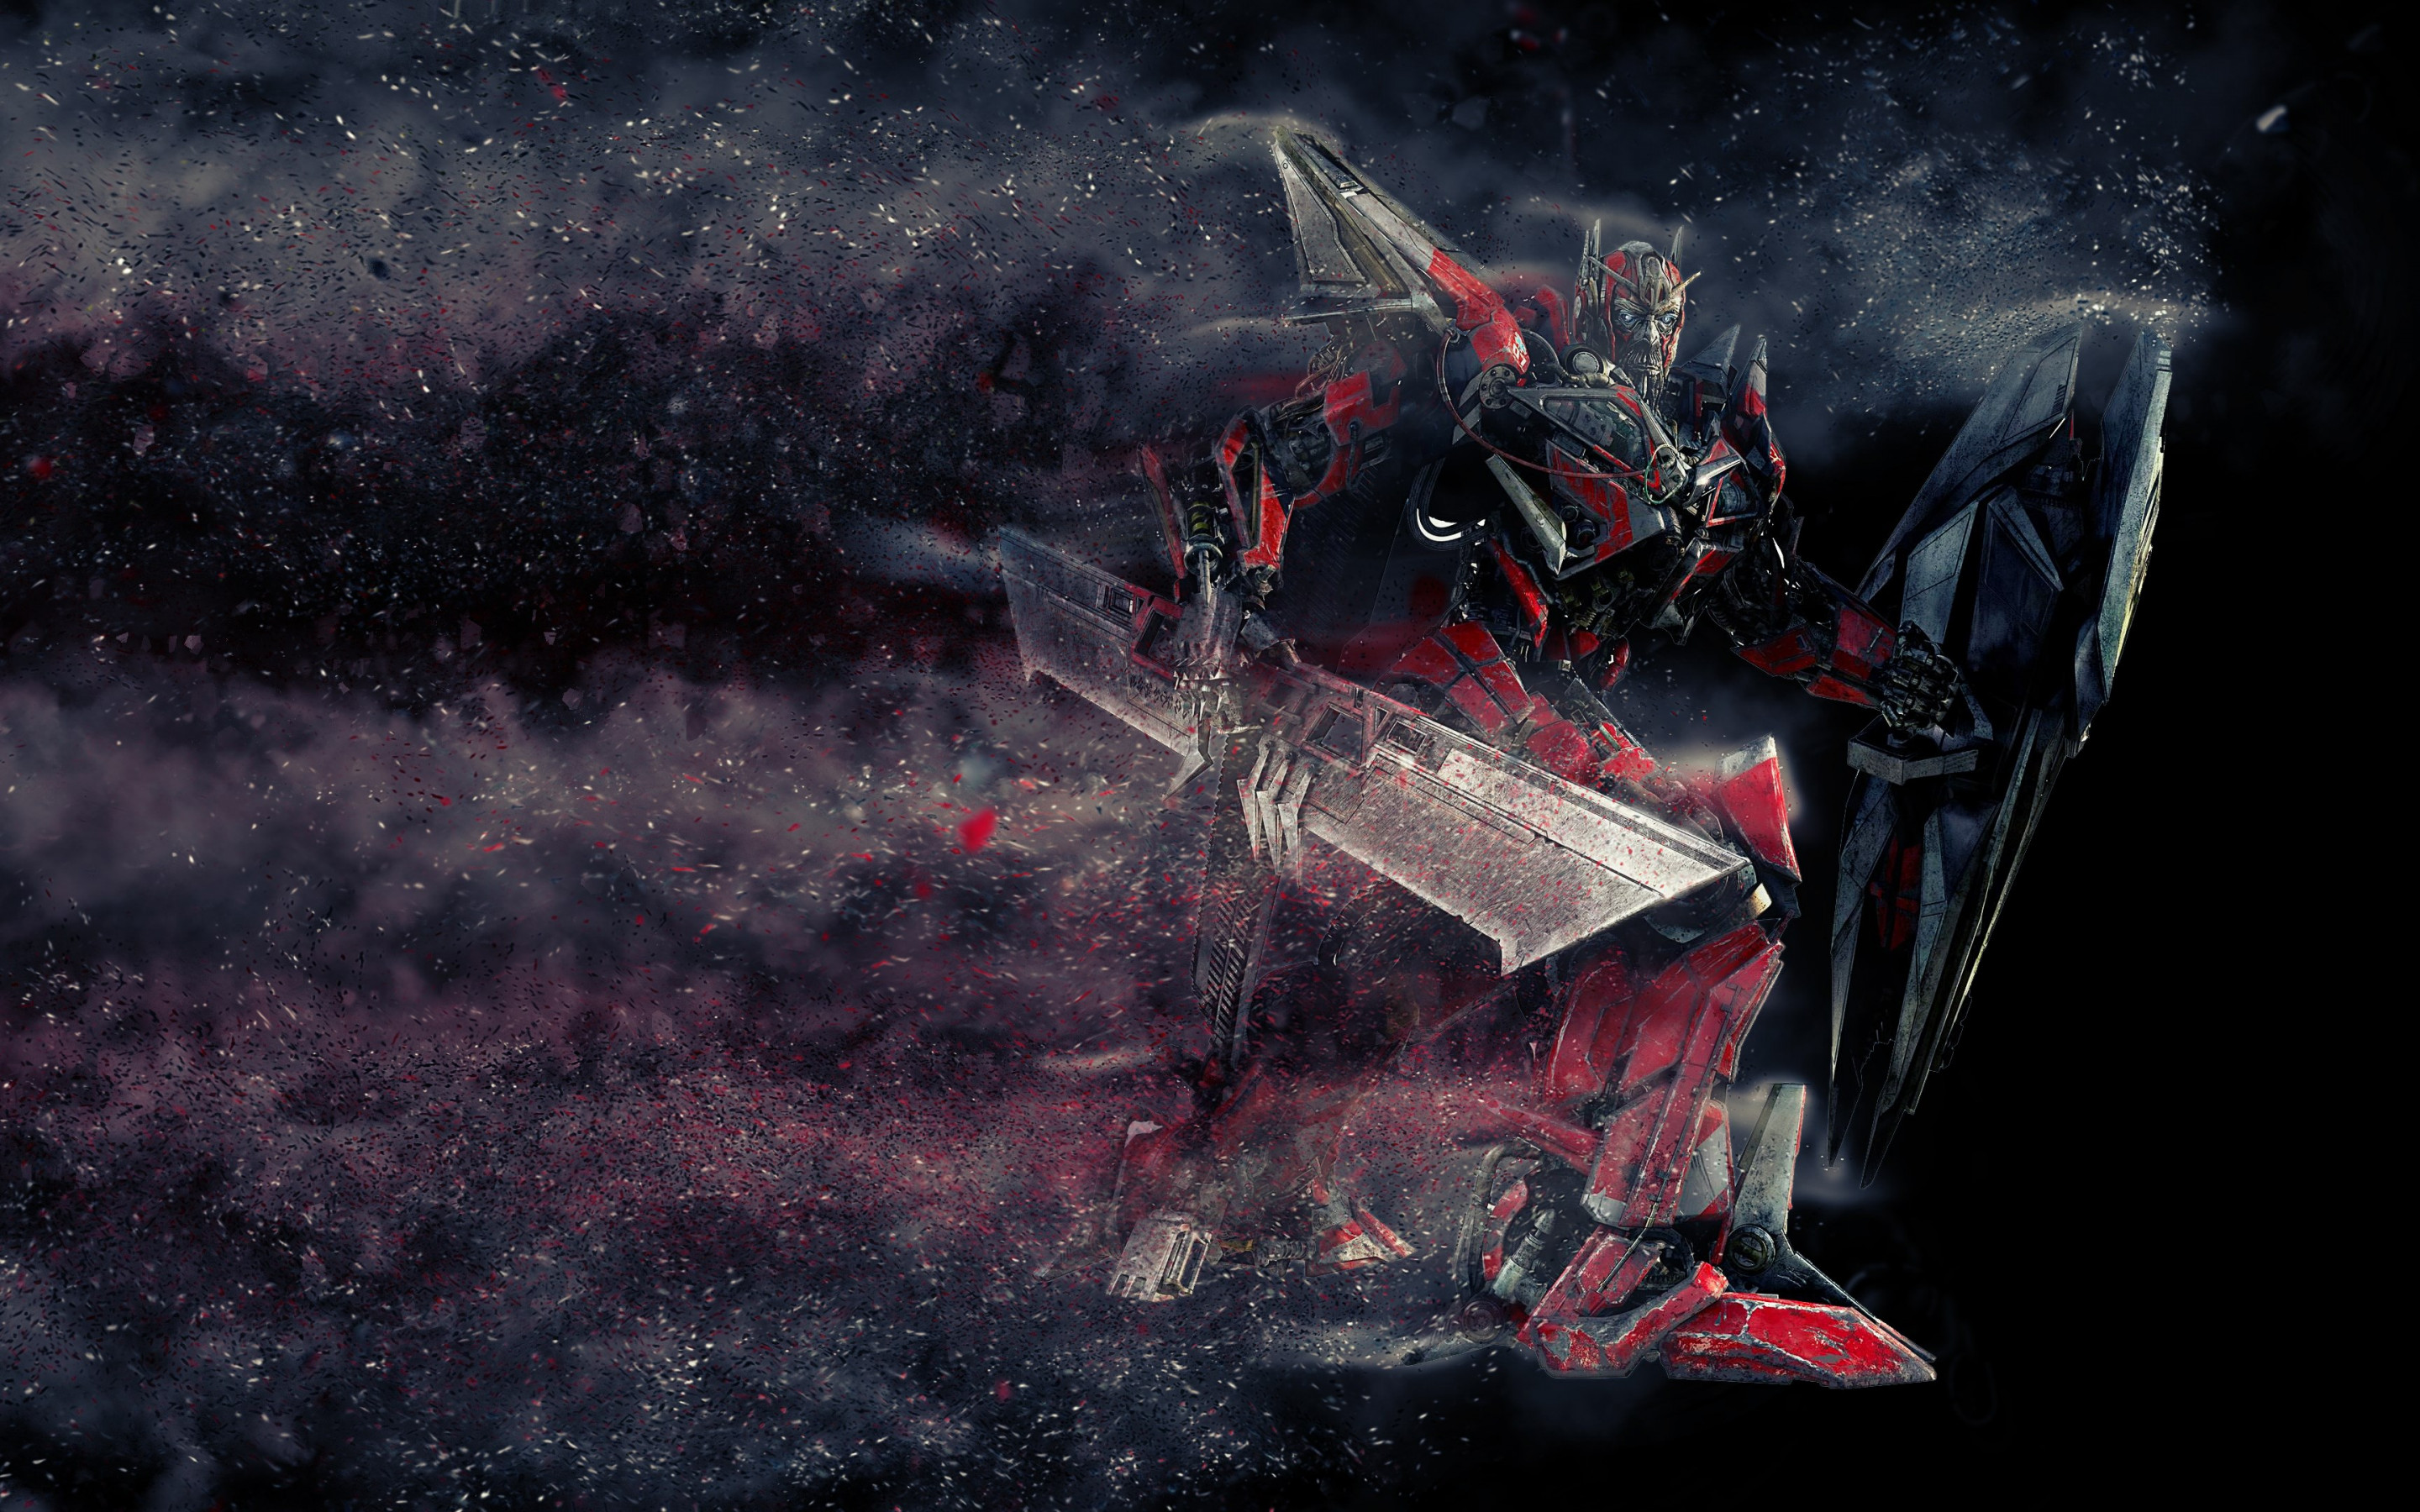 Sentinel Prime from Transformers wallpaper 2880x1800